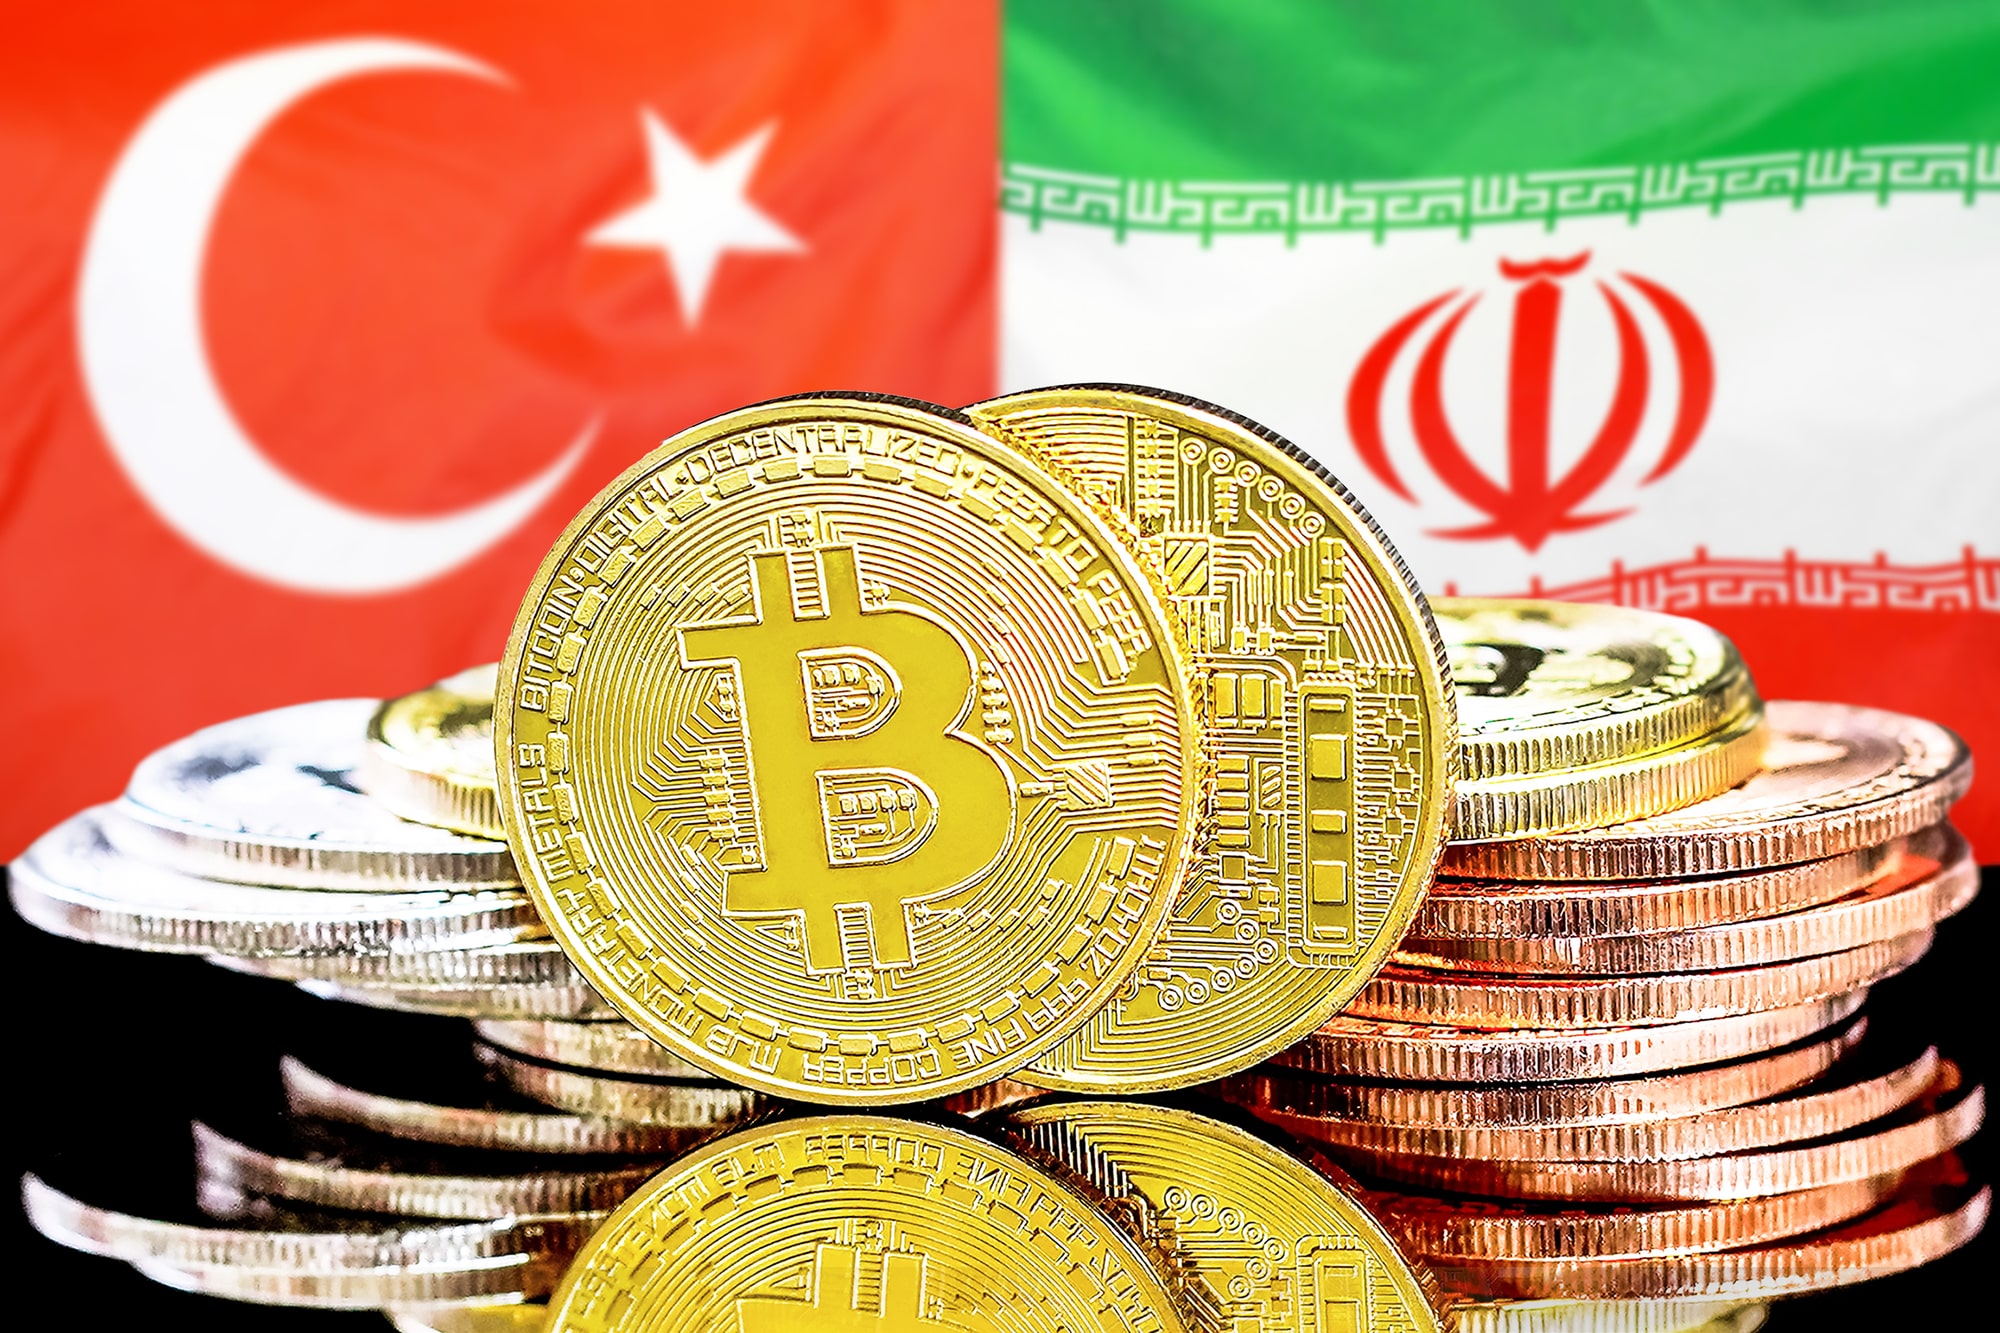 Crypto adoption in the Middle East first comes from citizens of unstable countries